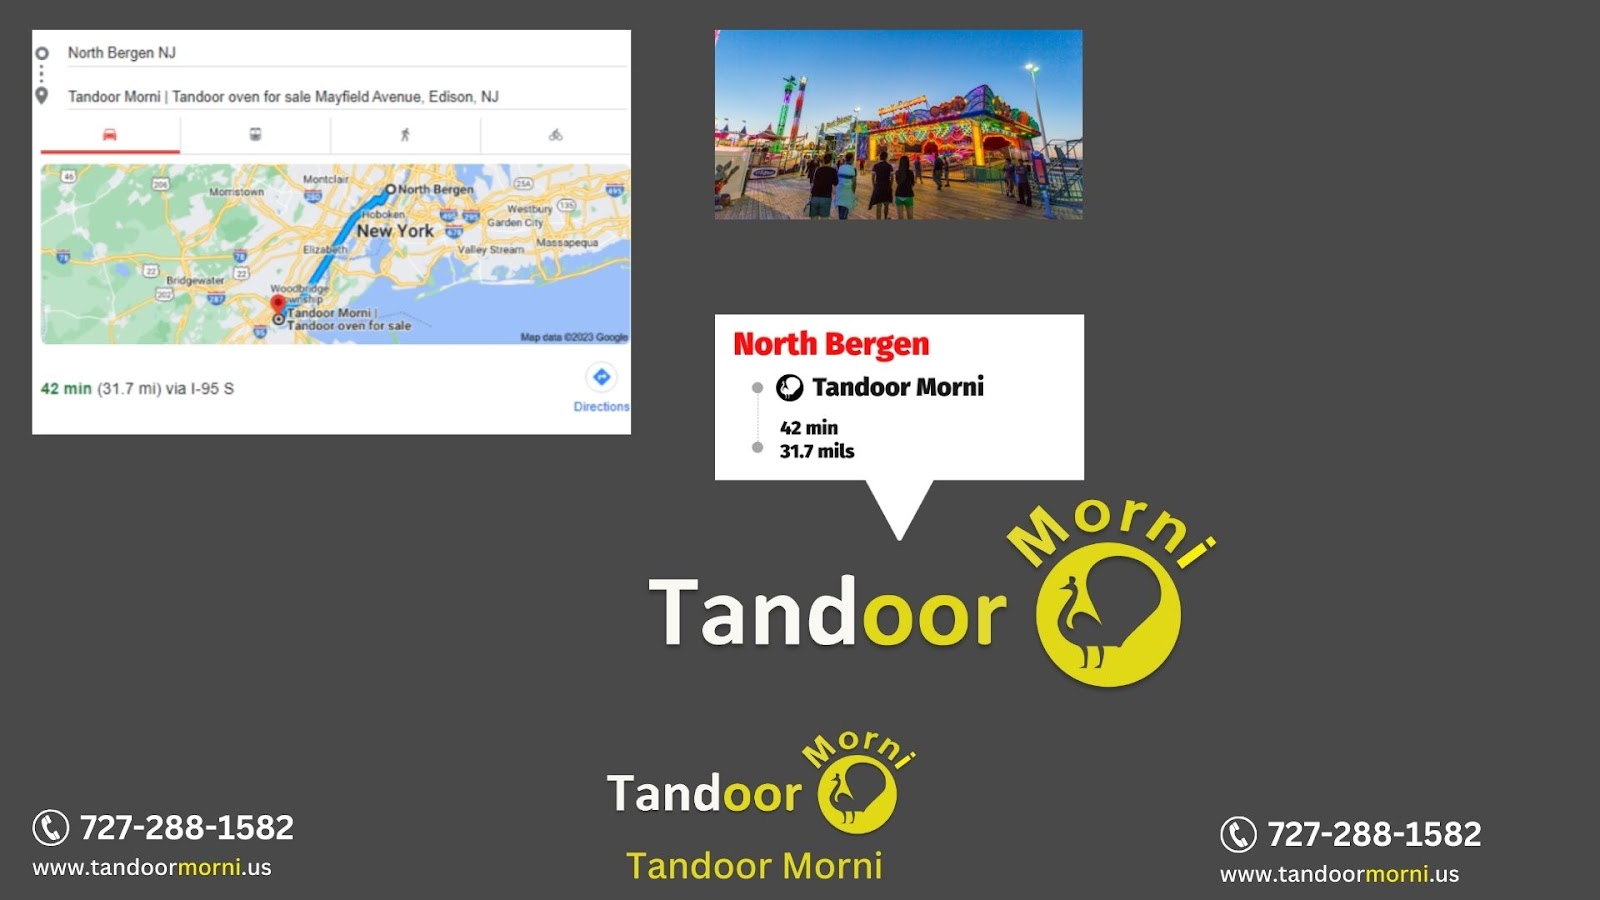 The distances between several locations in New Jersey, including as New Brunswick, Hoboken, Princeton, Bridgewater, and Piscataway, are displayed on tandoors for sale there.